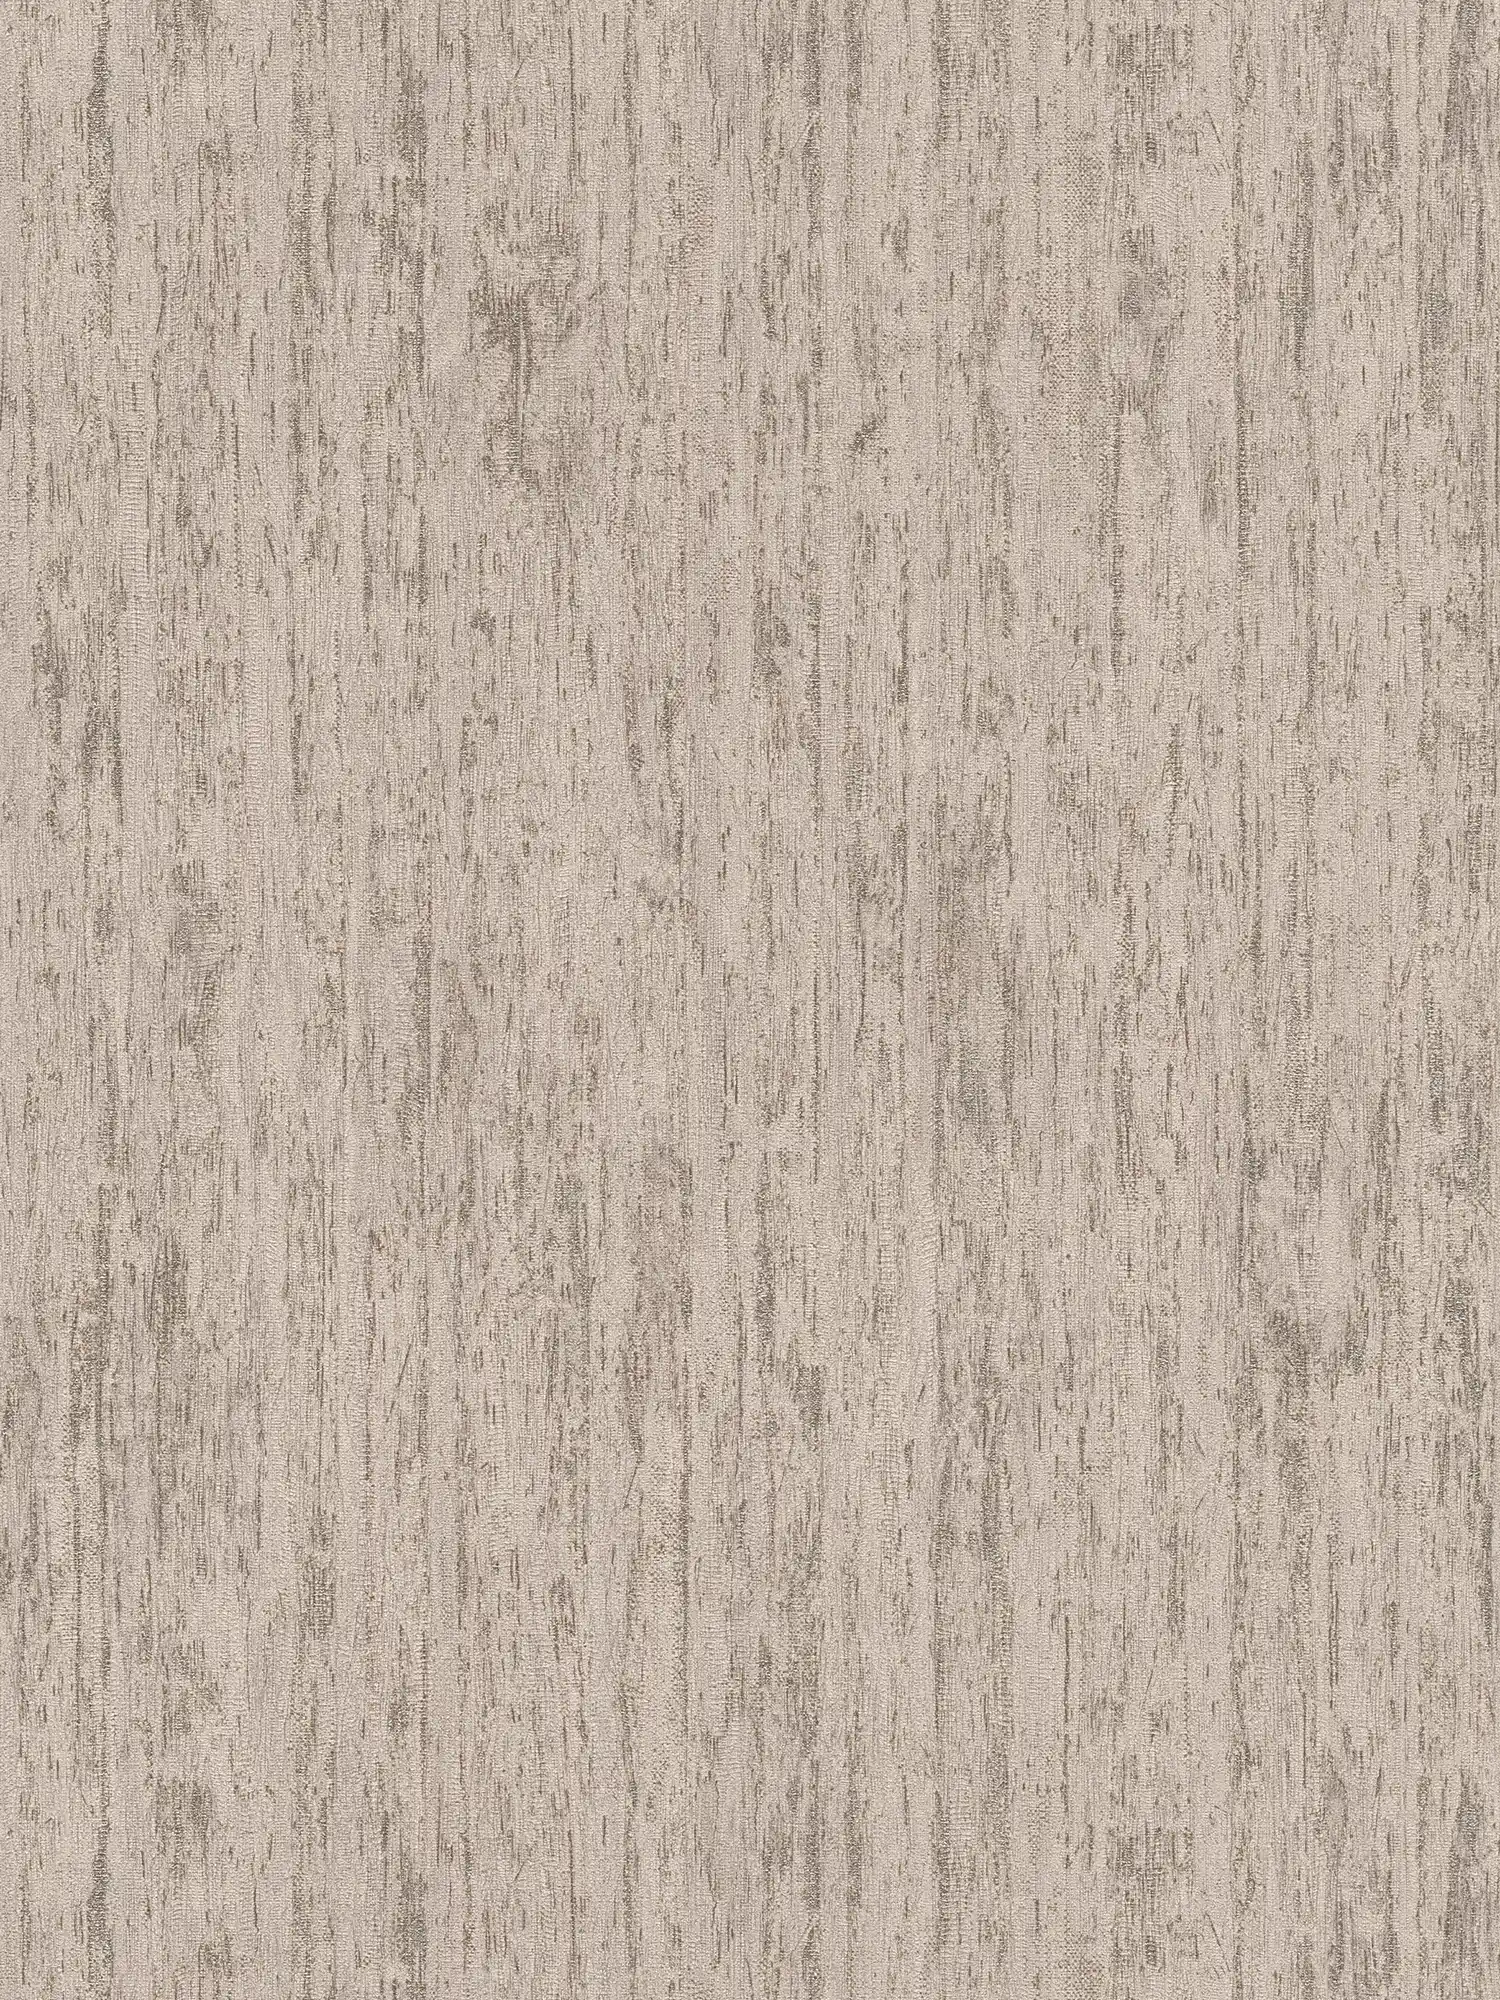 Structured plain wallpaper, slightly glossy - grey, beige, silver
